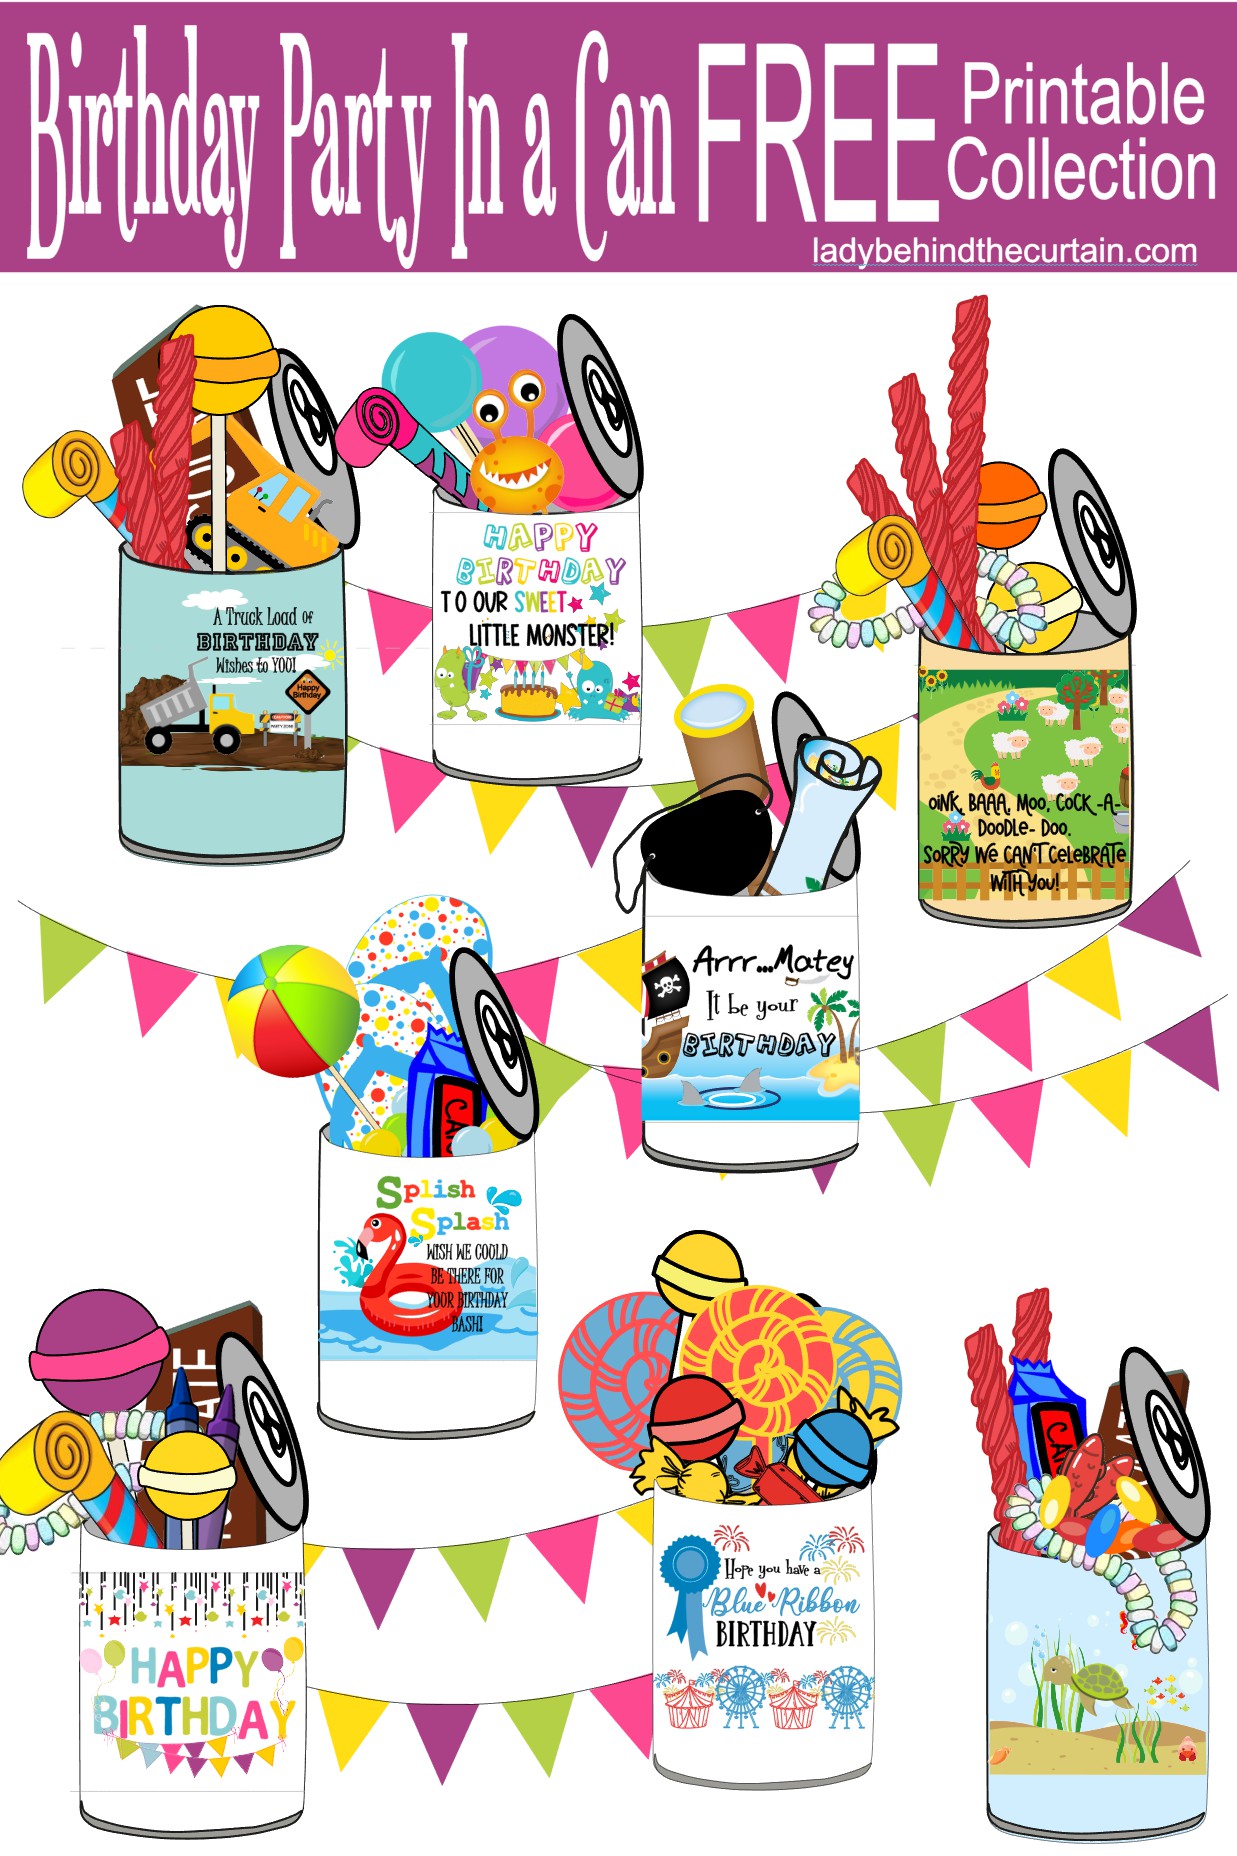 Birthday Party In a Can FREE Printable Collection